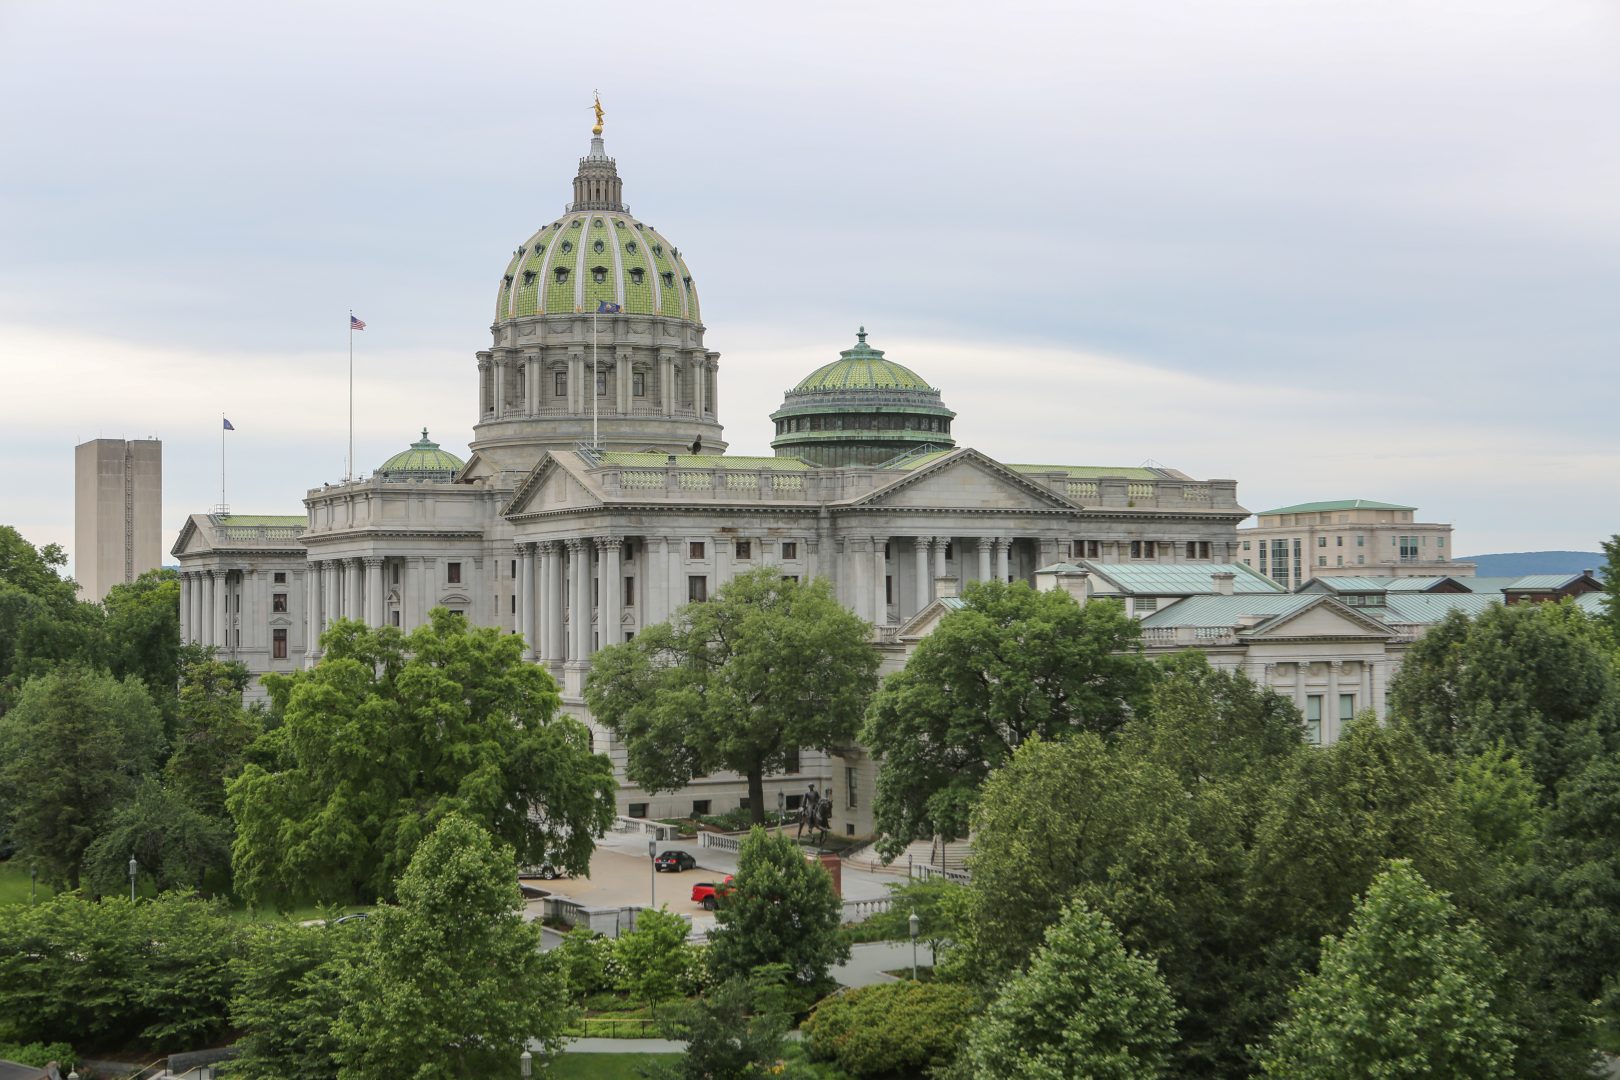 The Pennsylvania State Capitol.